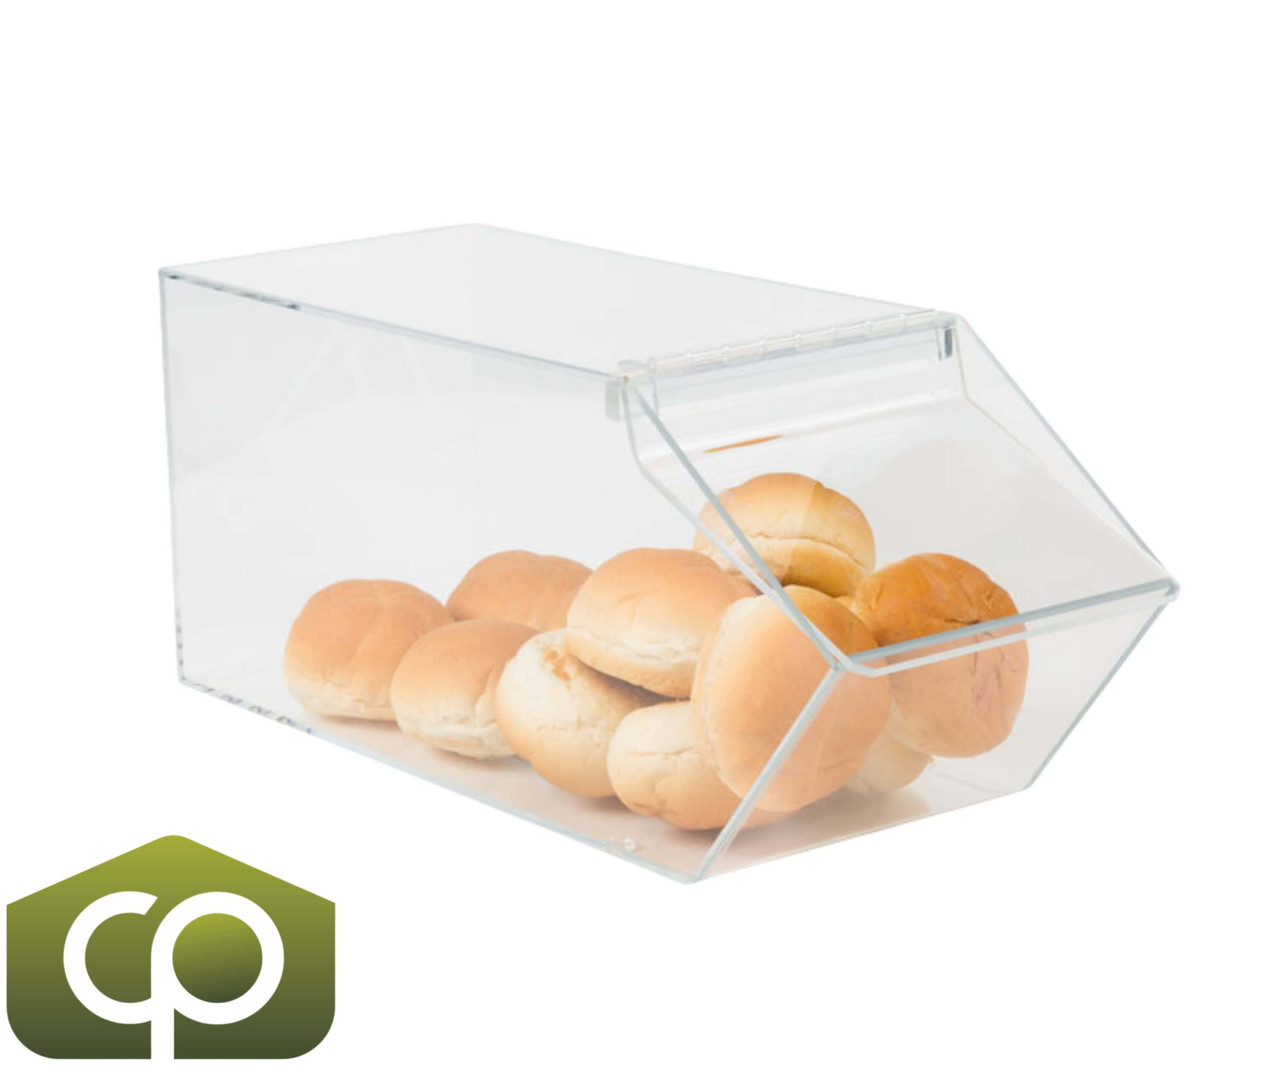 Cal-Mil 7 1/2" x 19 1/2" x 8" Classic Stackable Acrylic Food Bin-Chicken Pieces